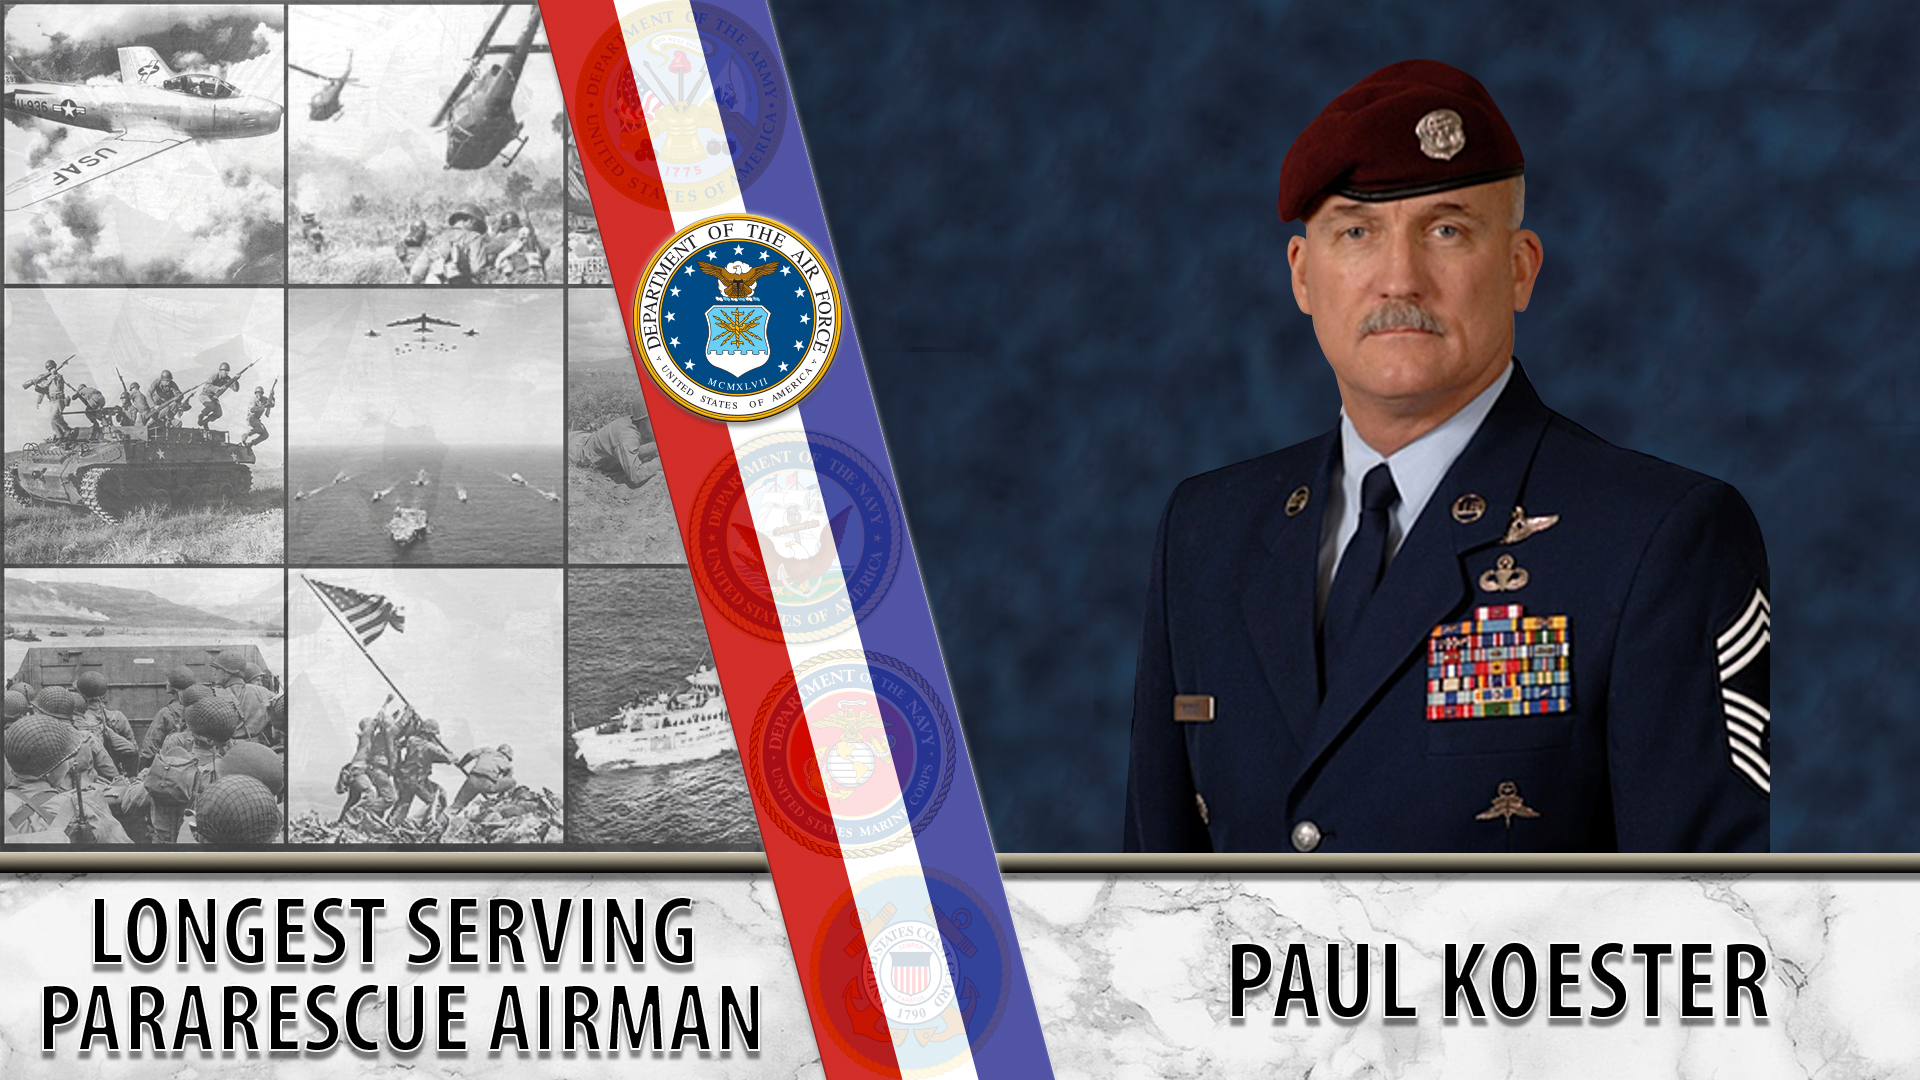 Air Force Veteran Paul Koester was the longest-serving pararescue airman in history.